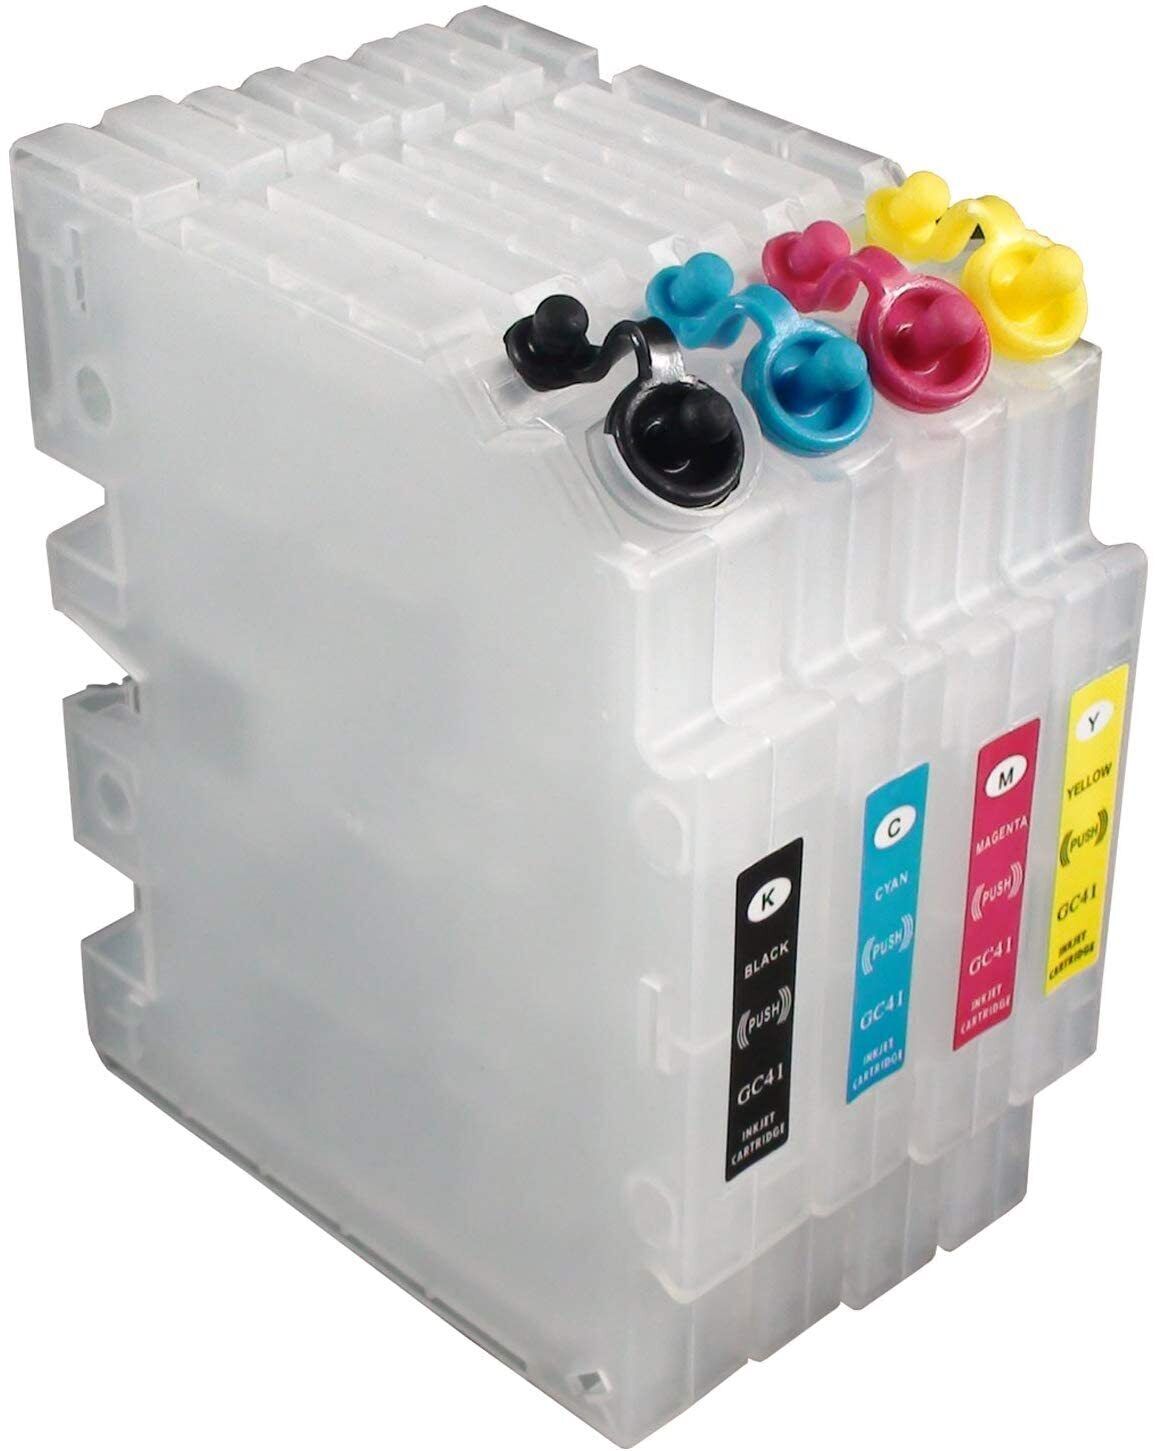 Empty Refillable GC-41 GC41 Ink Cartridges with Dye Pigment Sublimation Ink